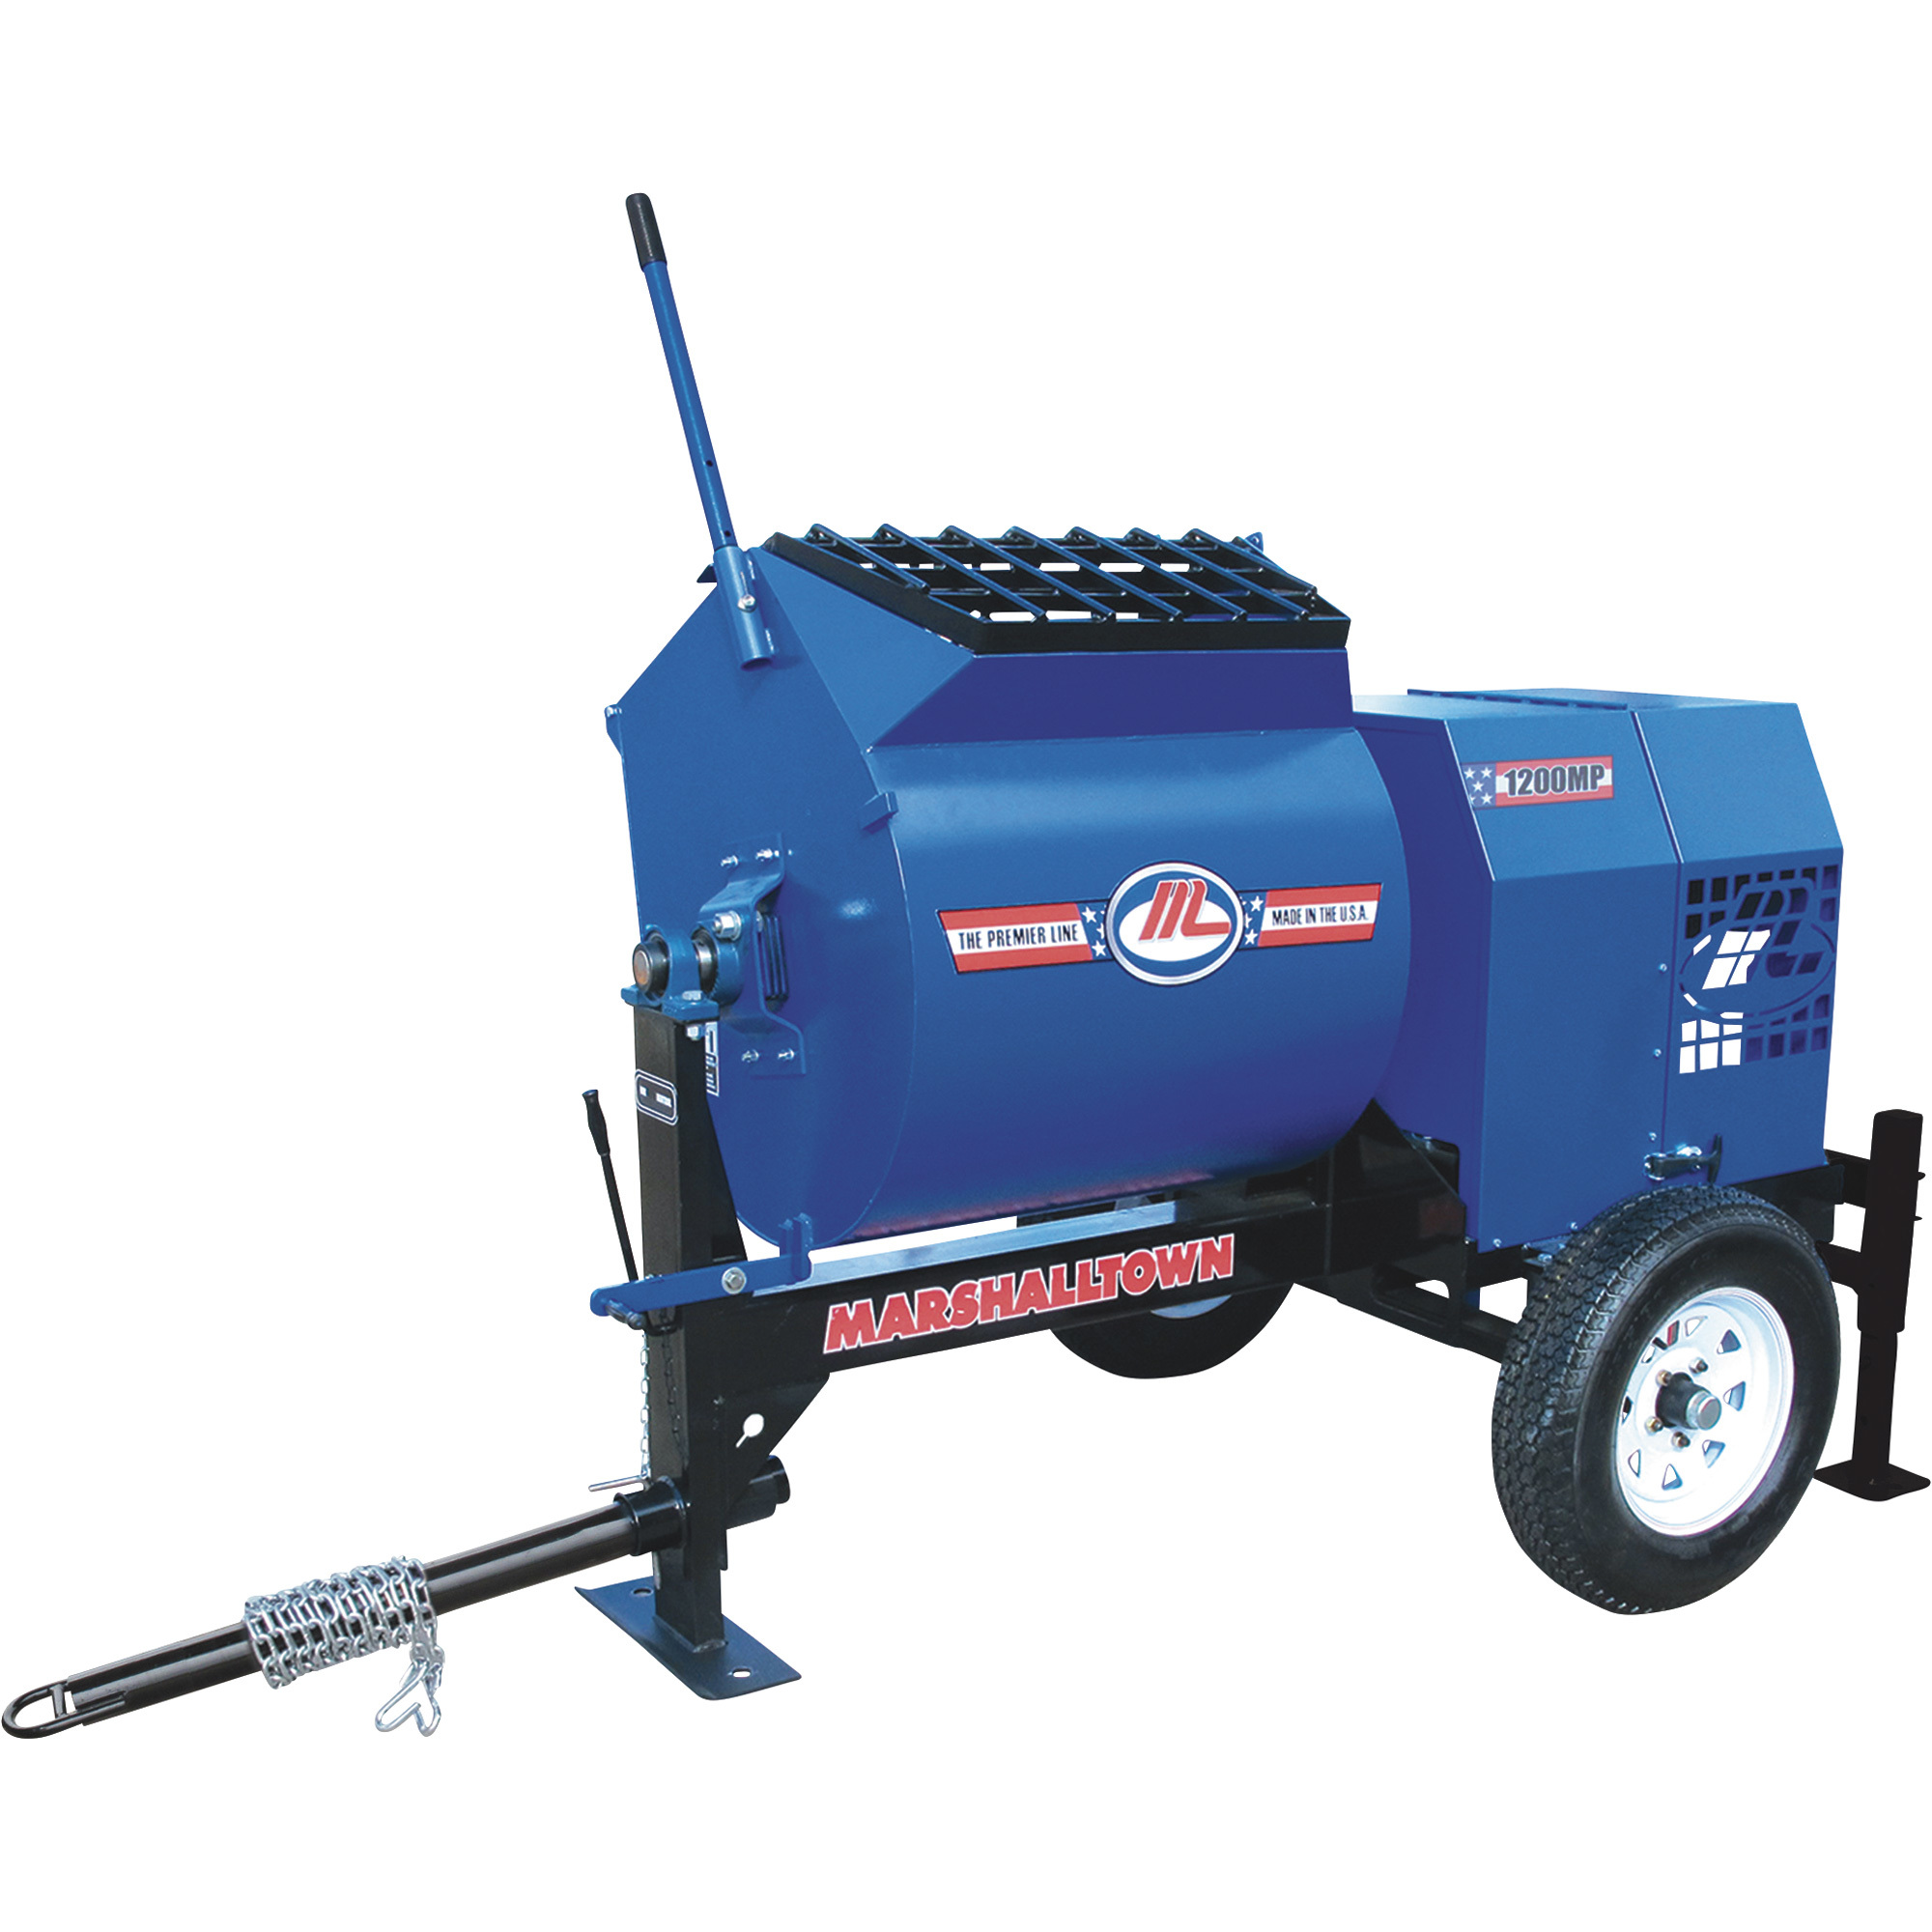 Marshalltown 1200MP Mortar/Plaster Mixer with Pintle Tow Outrigger and 3 HP Electric Engine â Model 1200MP3EPO